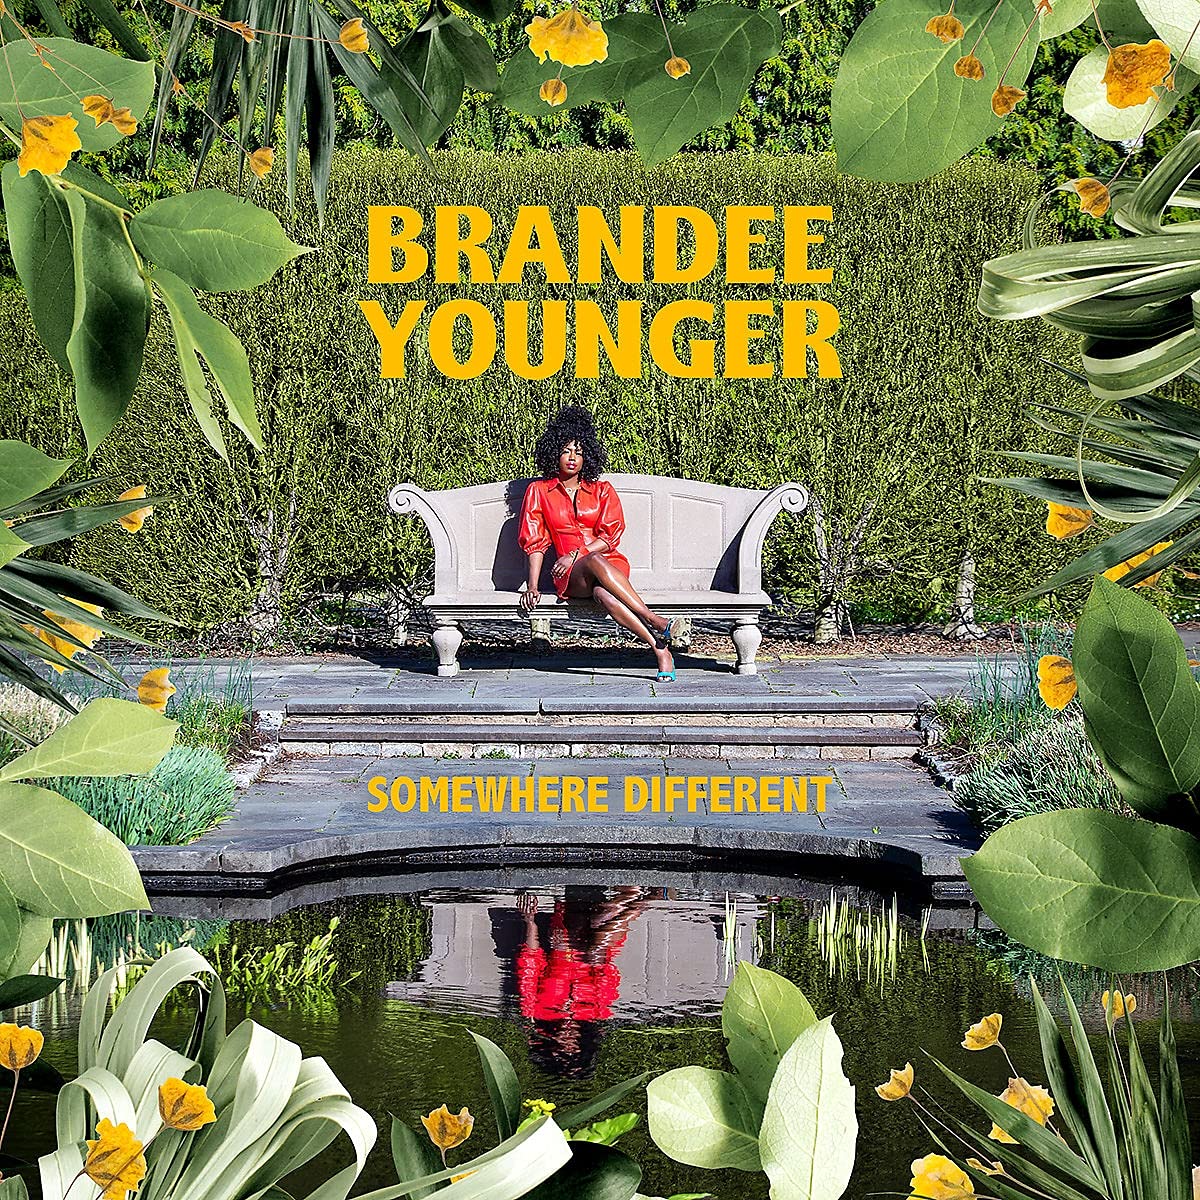 Brandee Younger – Somewhere Different (2021) [FLAC 24bit/96kHz]